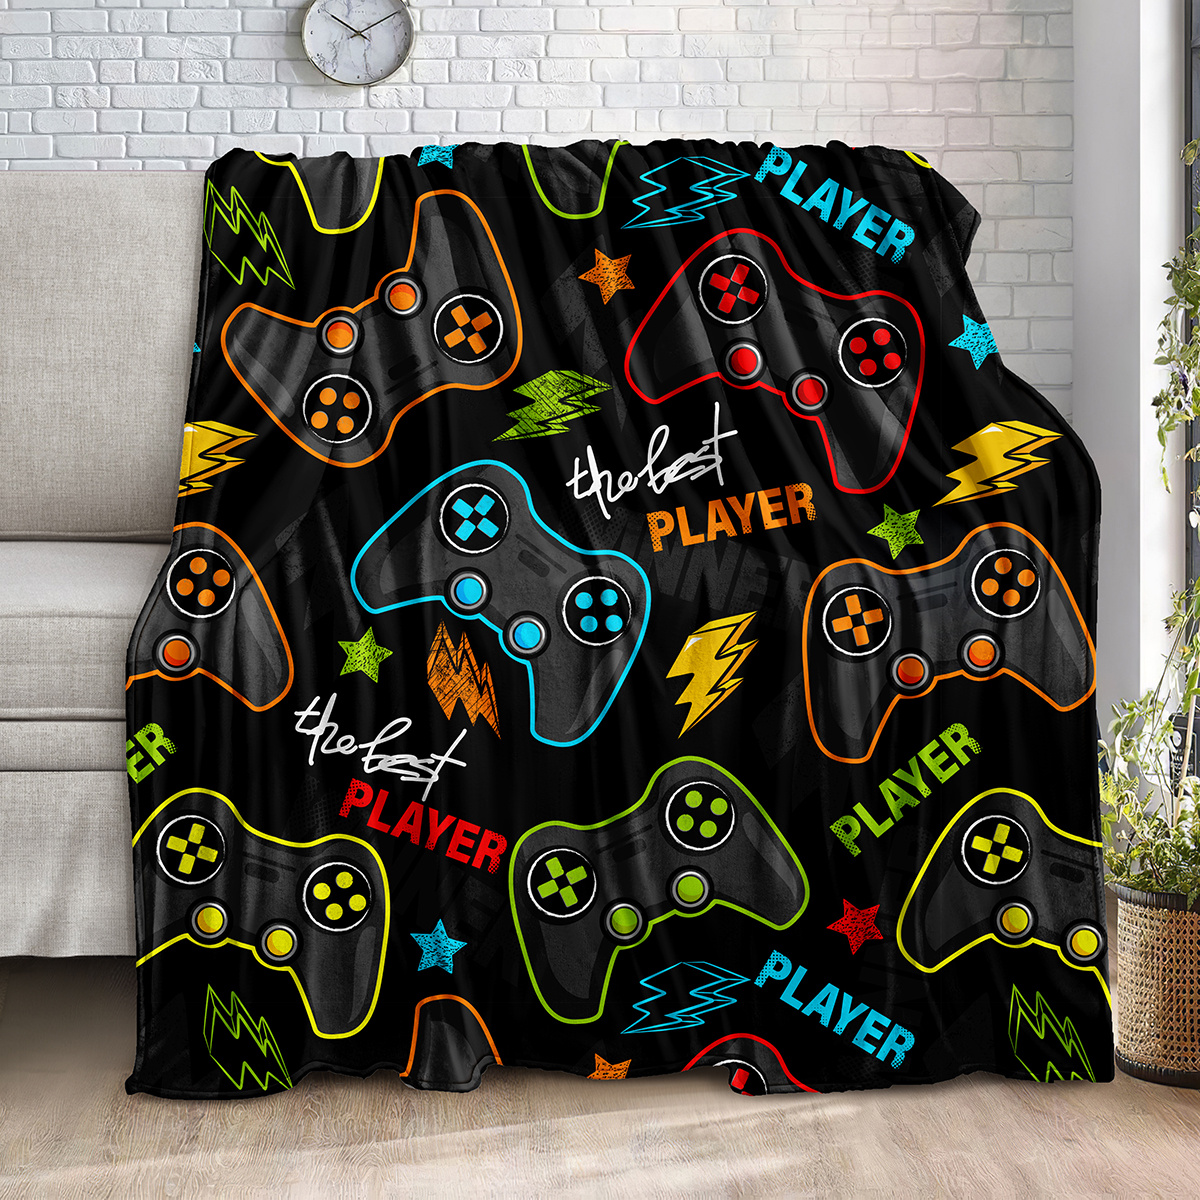 

Cozy Flannel Gamepad Blanket - Soft And Warm Throw Blanket For Gaming And Couch Bed - Perfect For Winter Nights